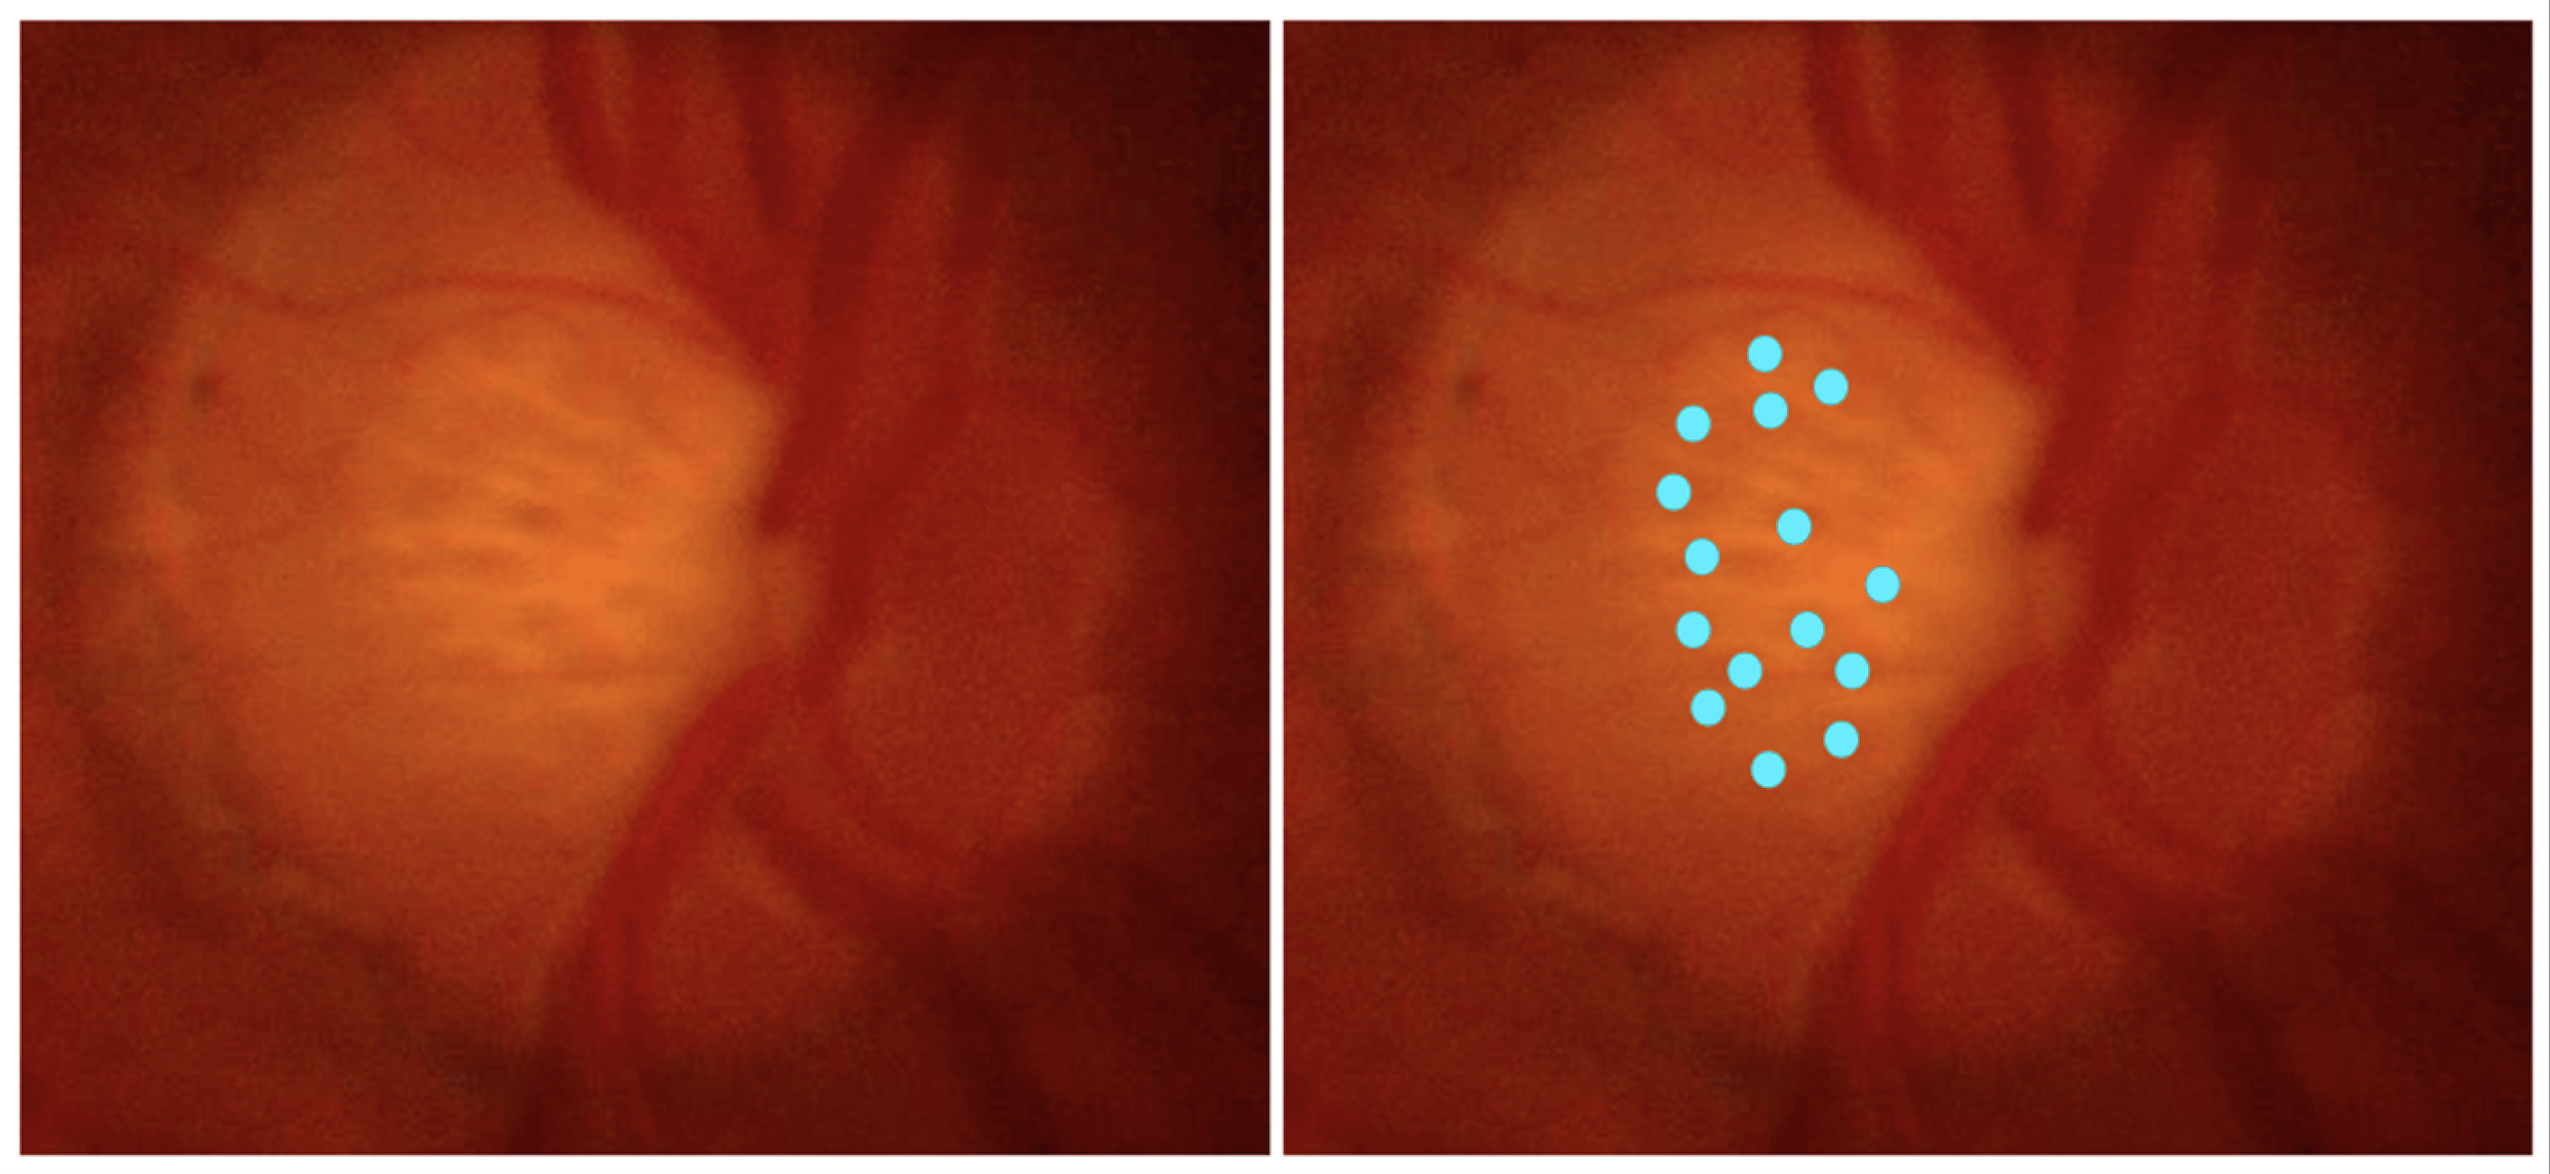 Funduscopic image of optic nerve head with multiple lamina cribrosa pores (left). Blue dots highlighting the location of the pores at the ONH (right). This finding was associated with extremely large CDR, deep optic disc cups, cylindrical and bean pot-shaped cups, the nasalization of central retinal vessels and higher degrees of African ancestry.